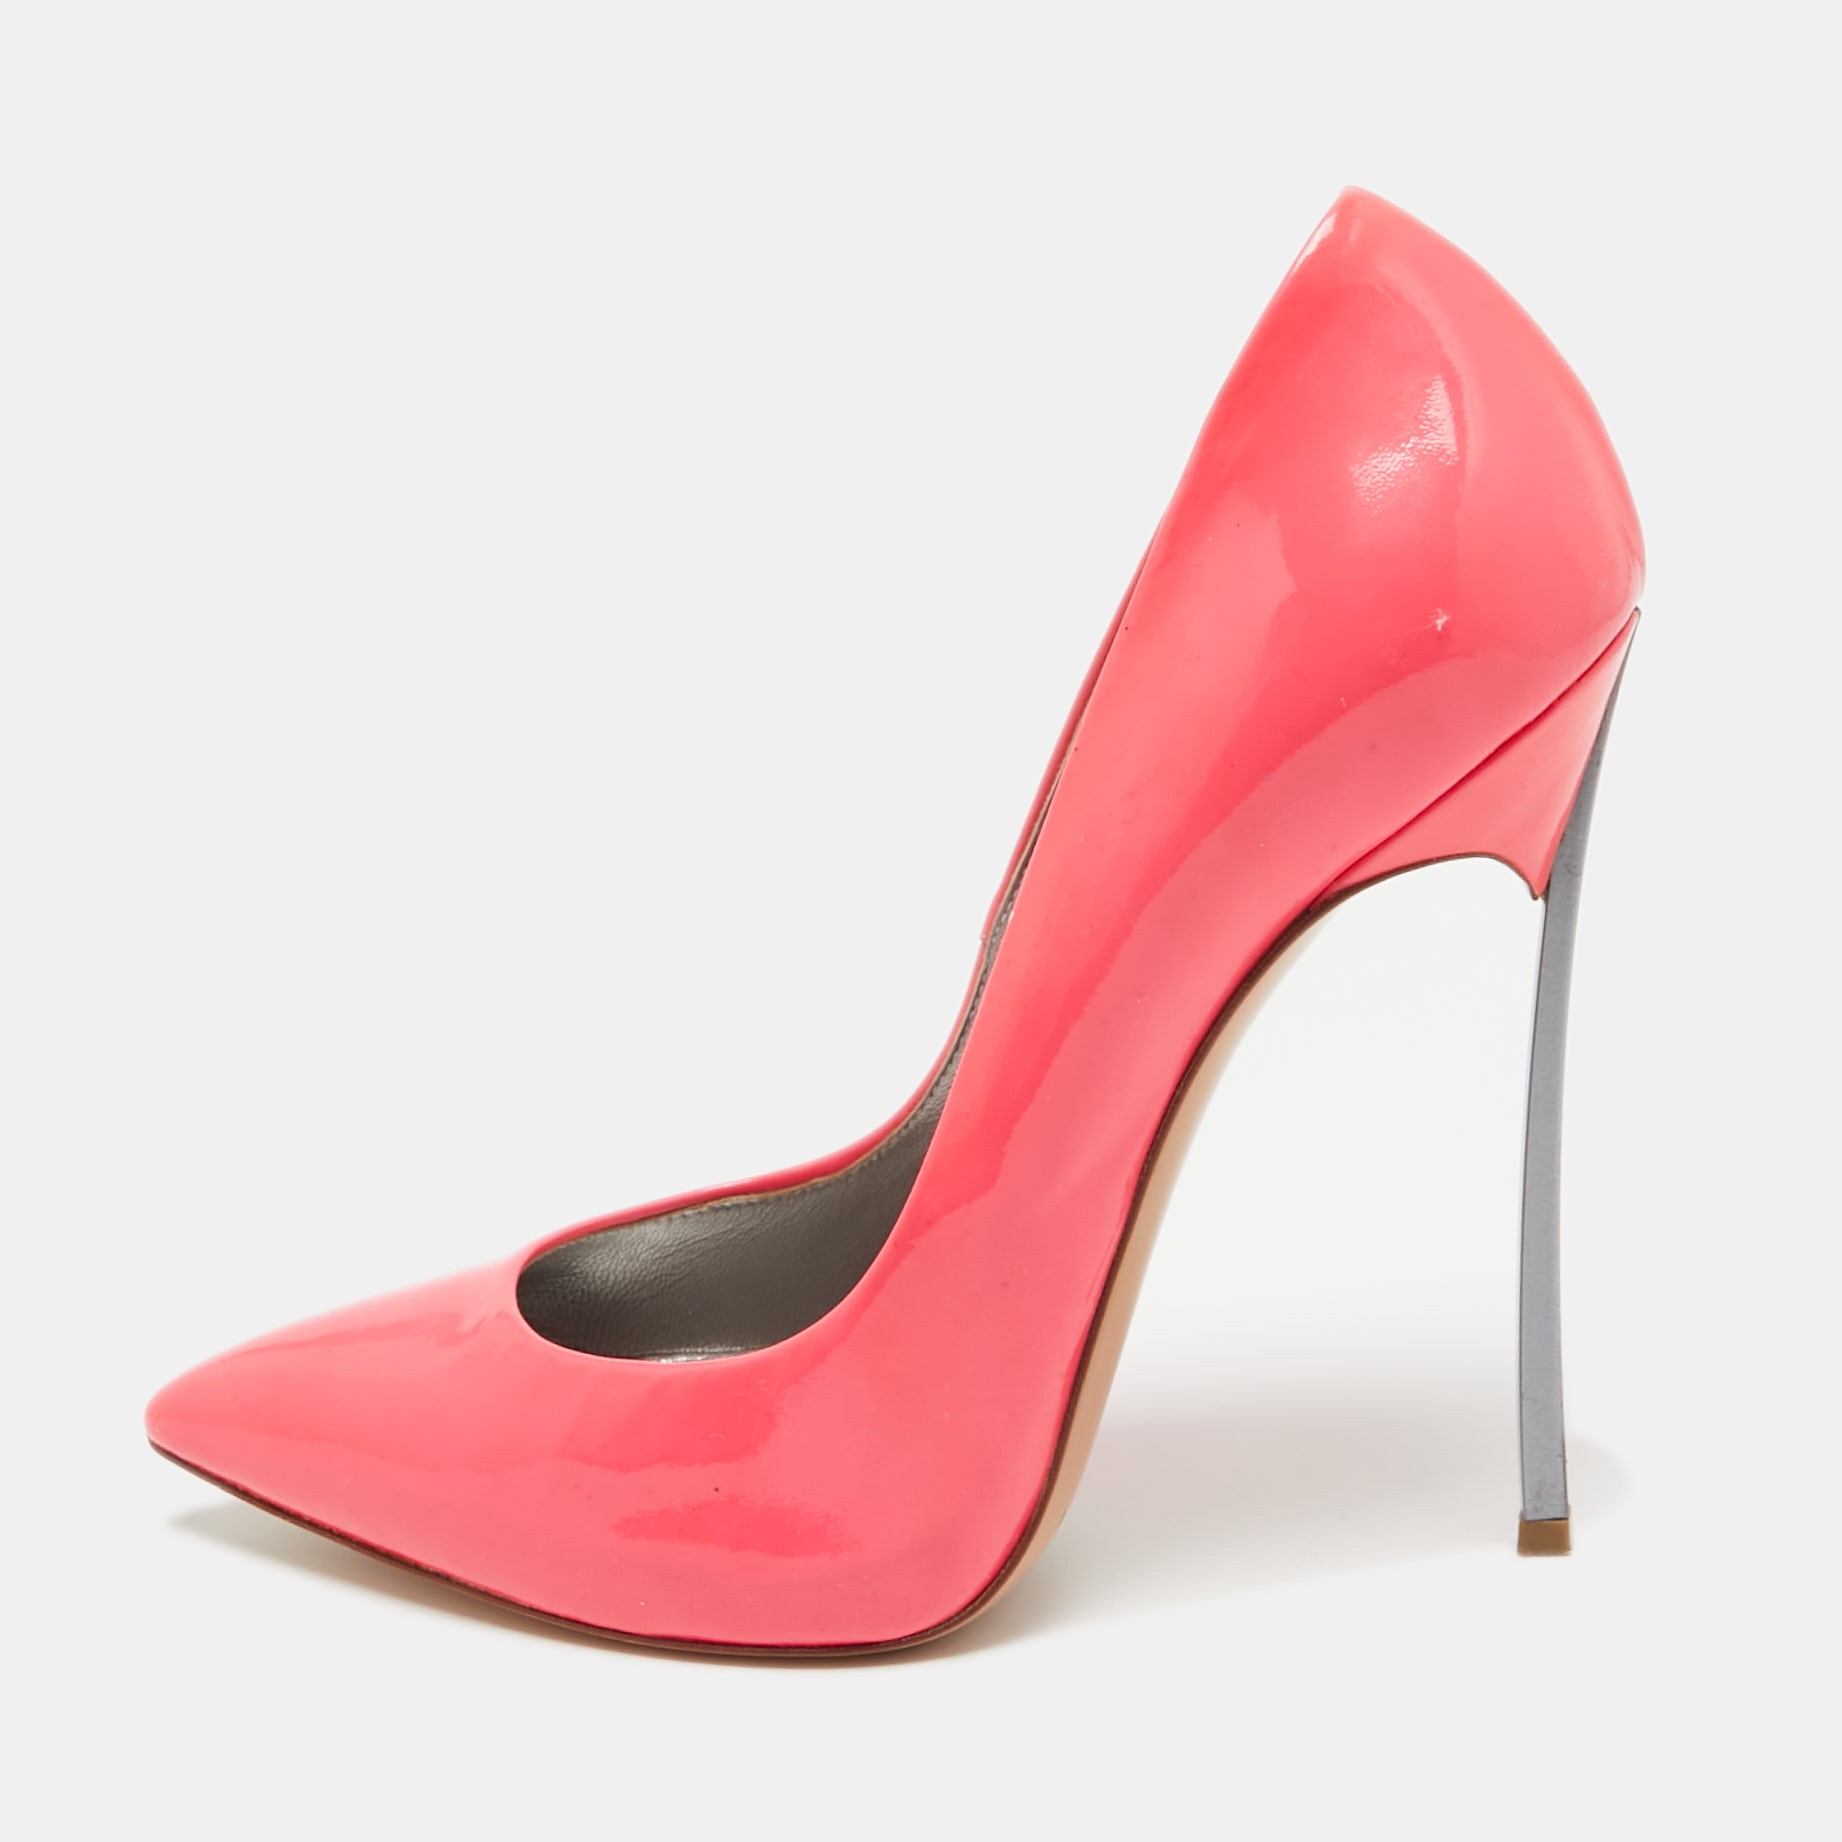 Casadei neon pink patent leather pointed toe pumps size 38